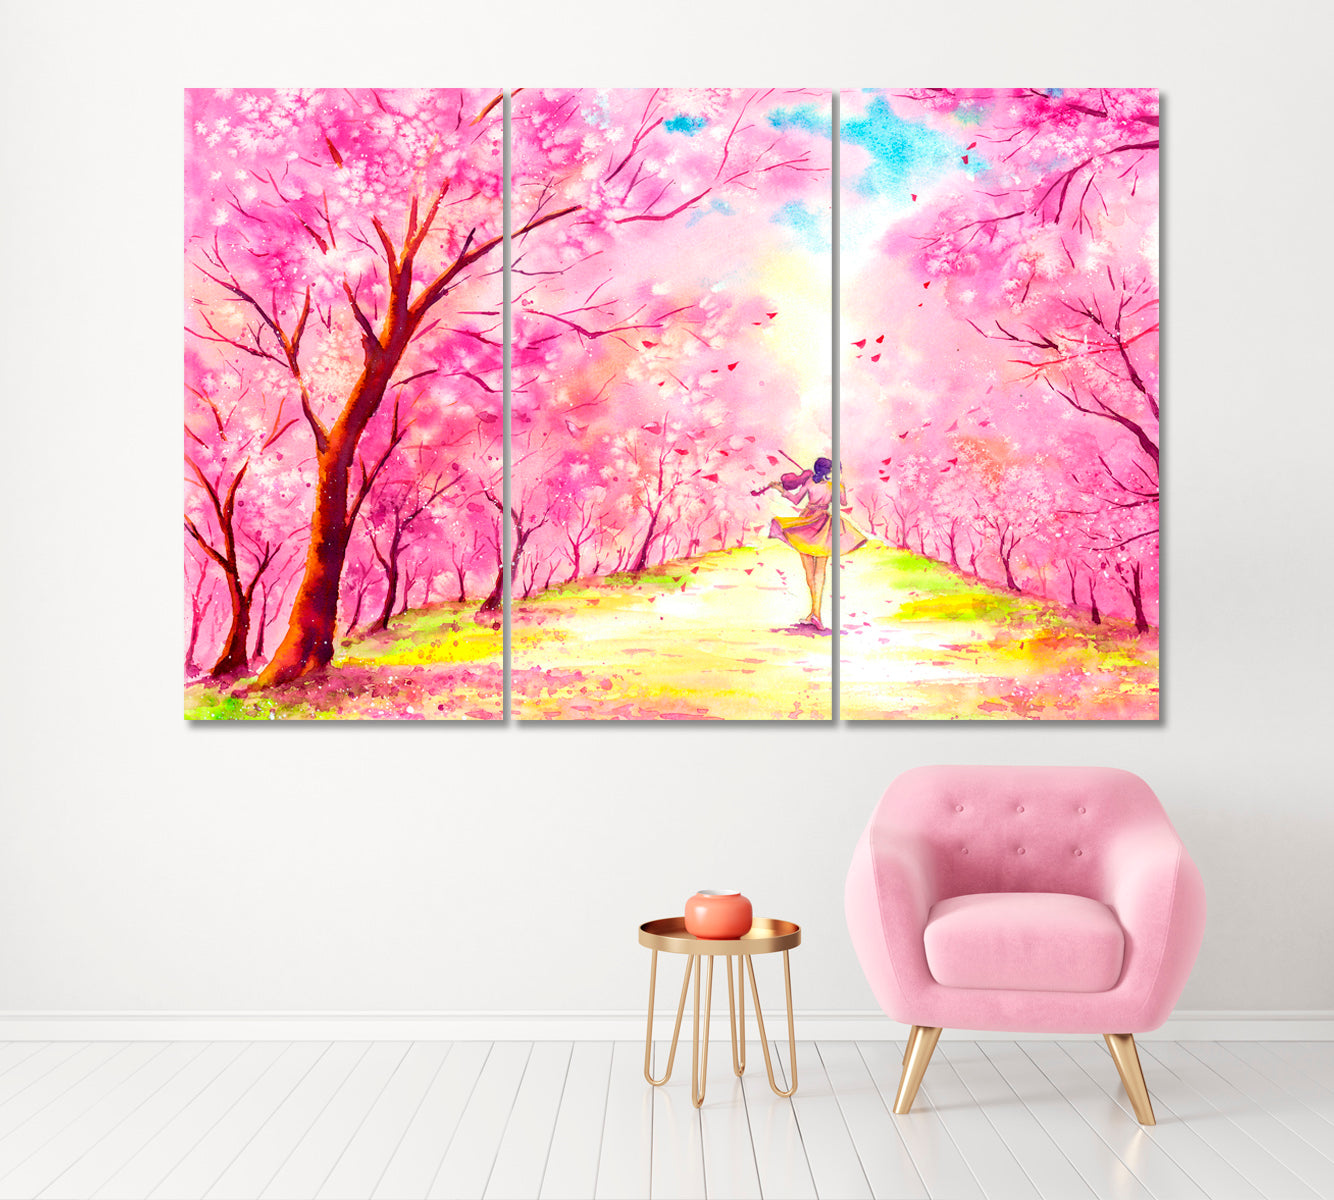 Landscape with Violinist and  Blooming Cherry Trees Canvas Print ArtLexy 3 Panels 36"x24" inches 